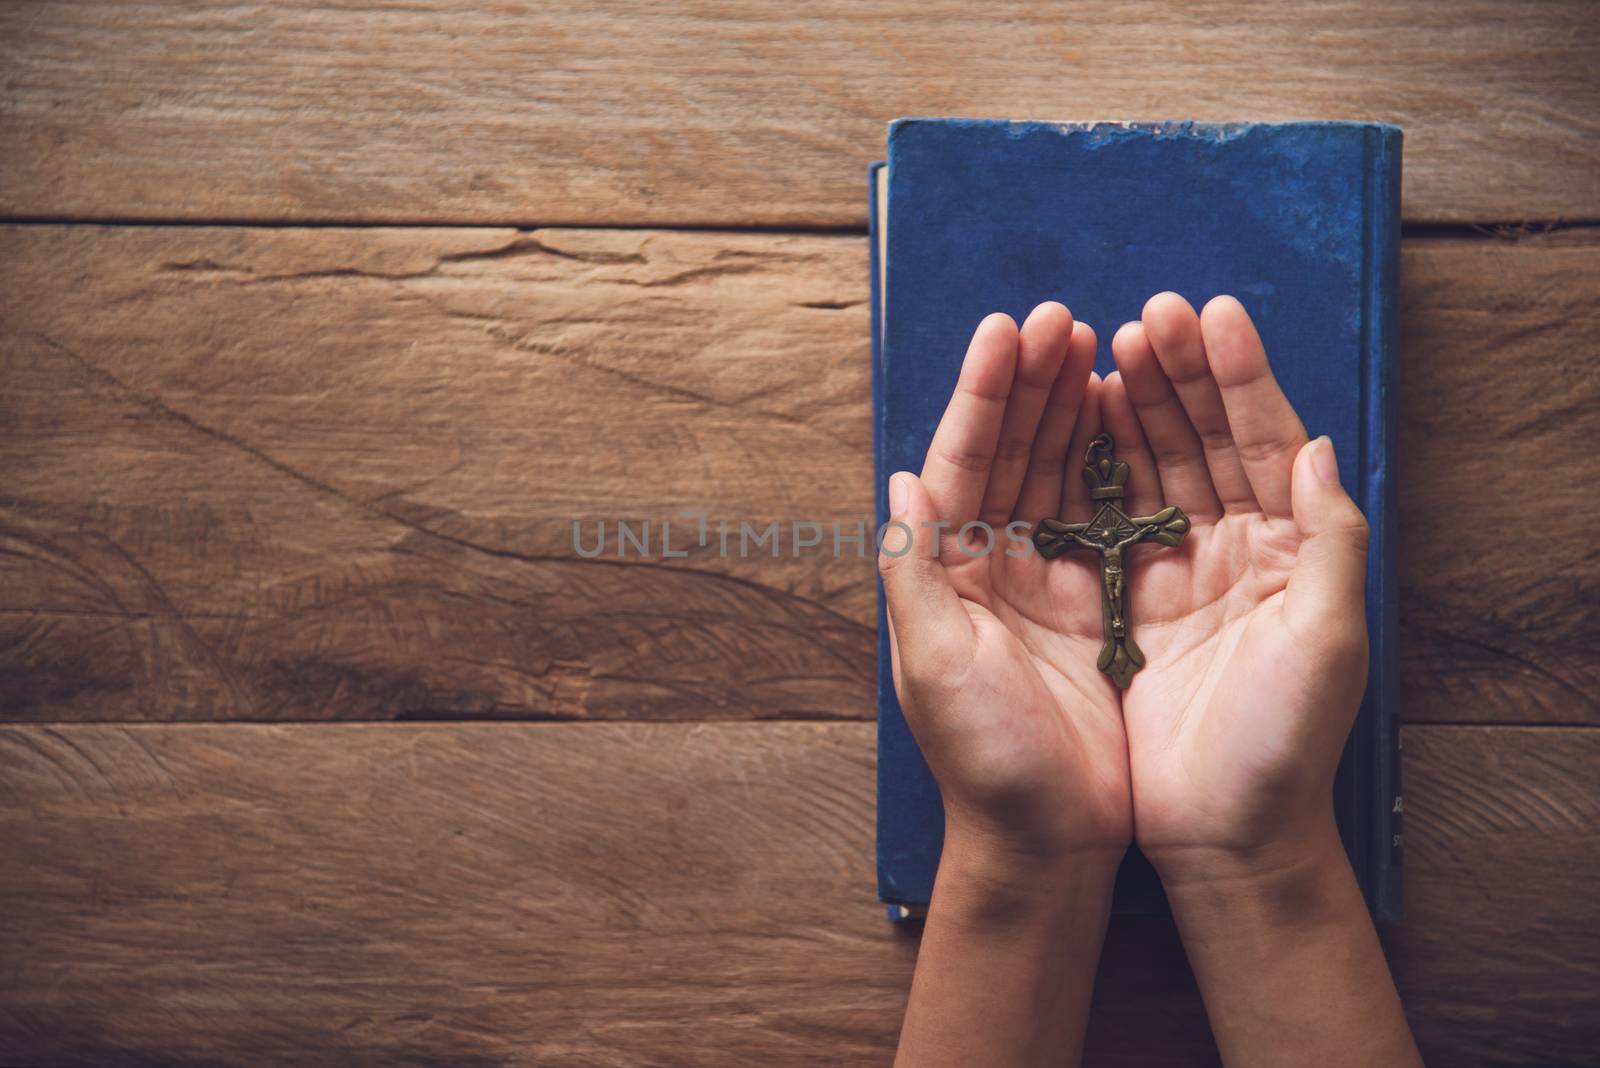 Human hands open palm of Christian for blessings and hopes Pray to God